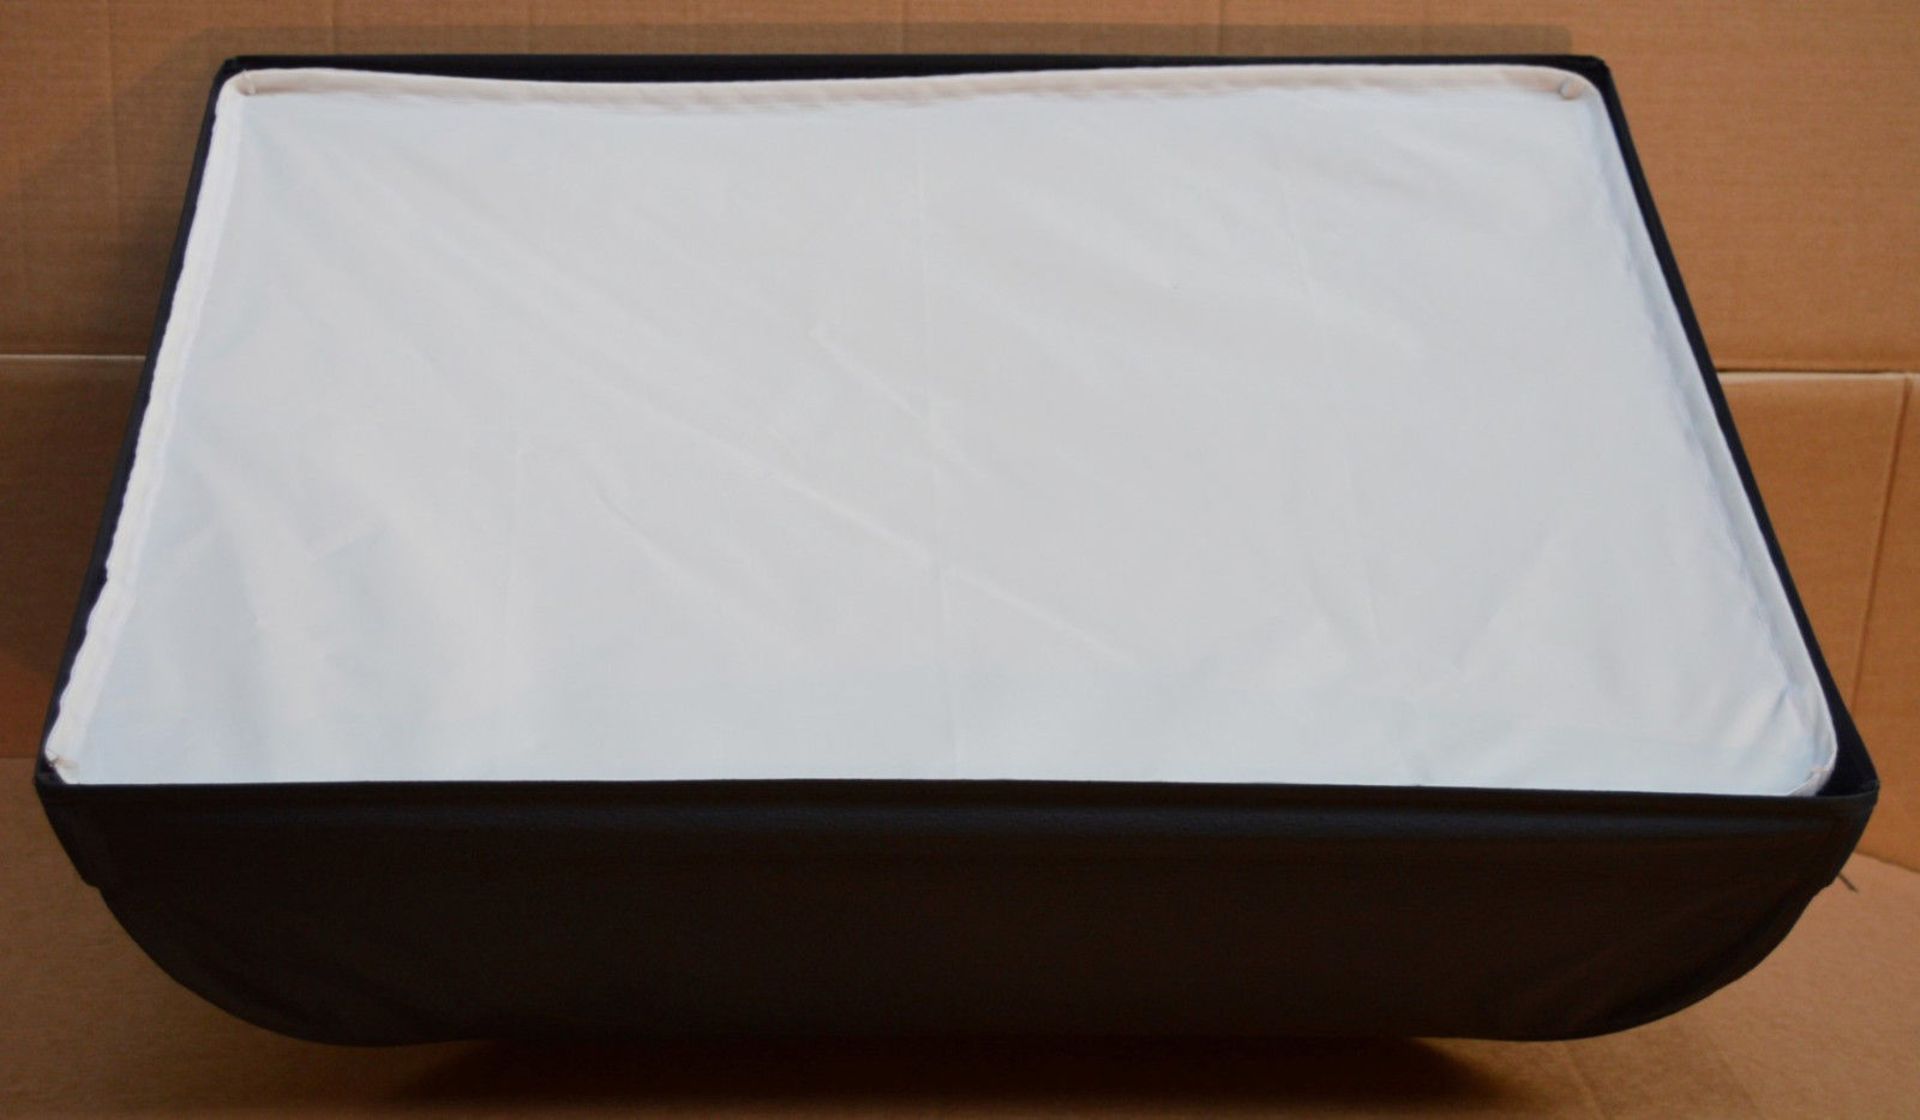 1 x Bowens Flash Light Wafer Softbox - Professional Photography Equipment - Good Condition - - Image 4 of 6